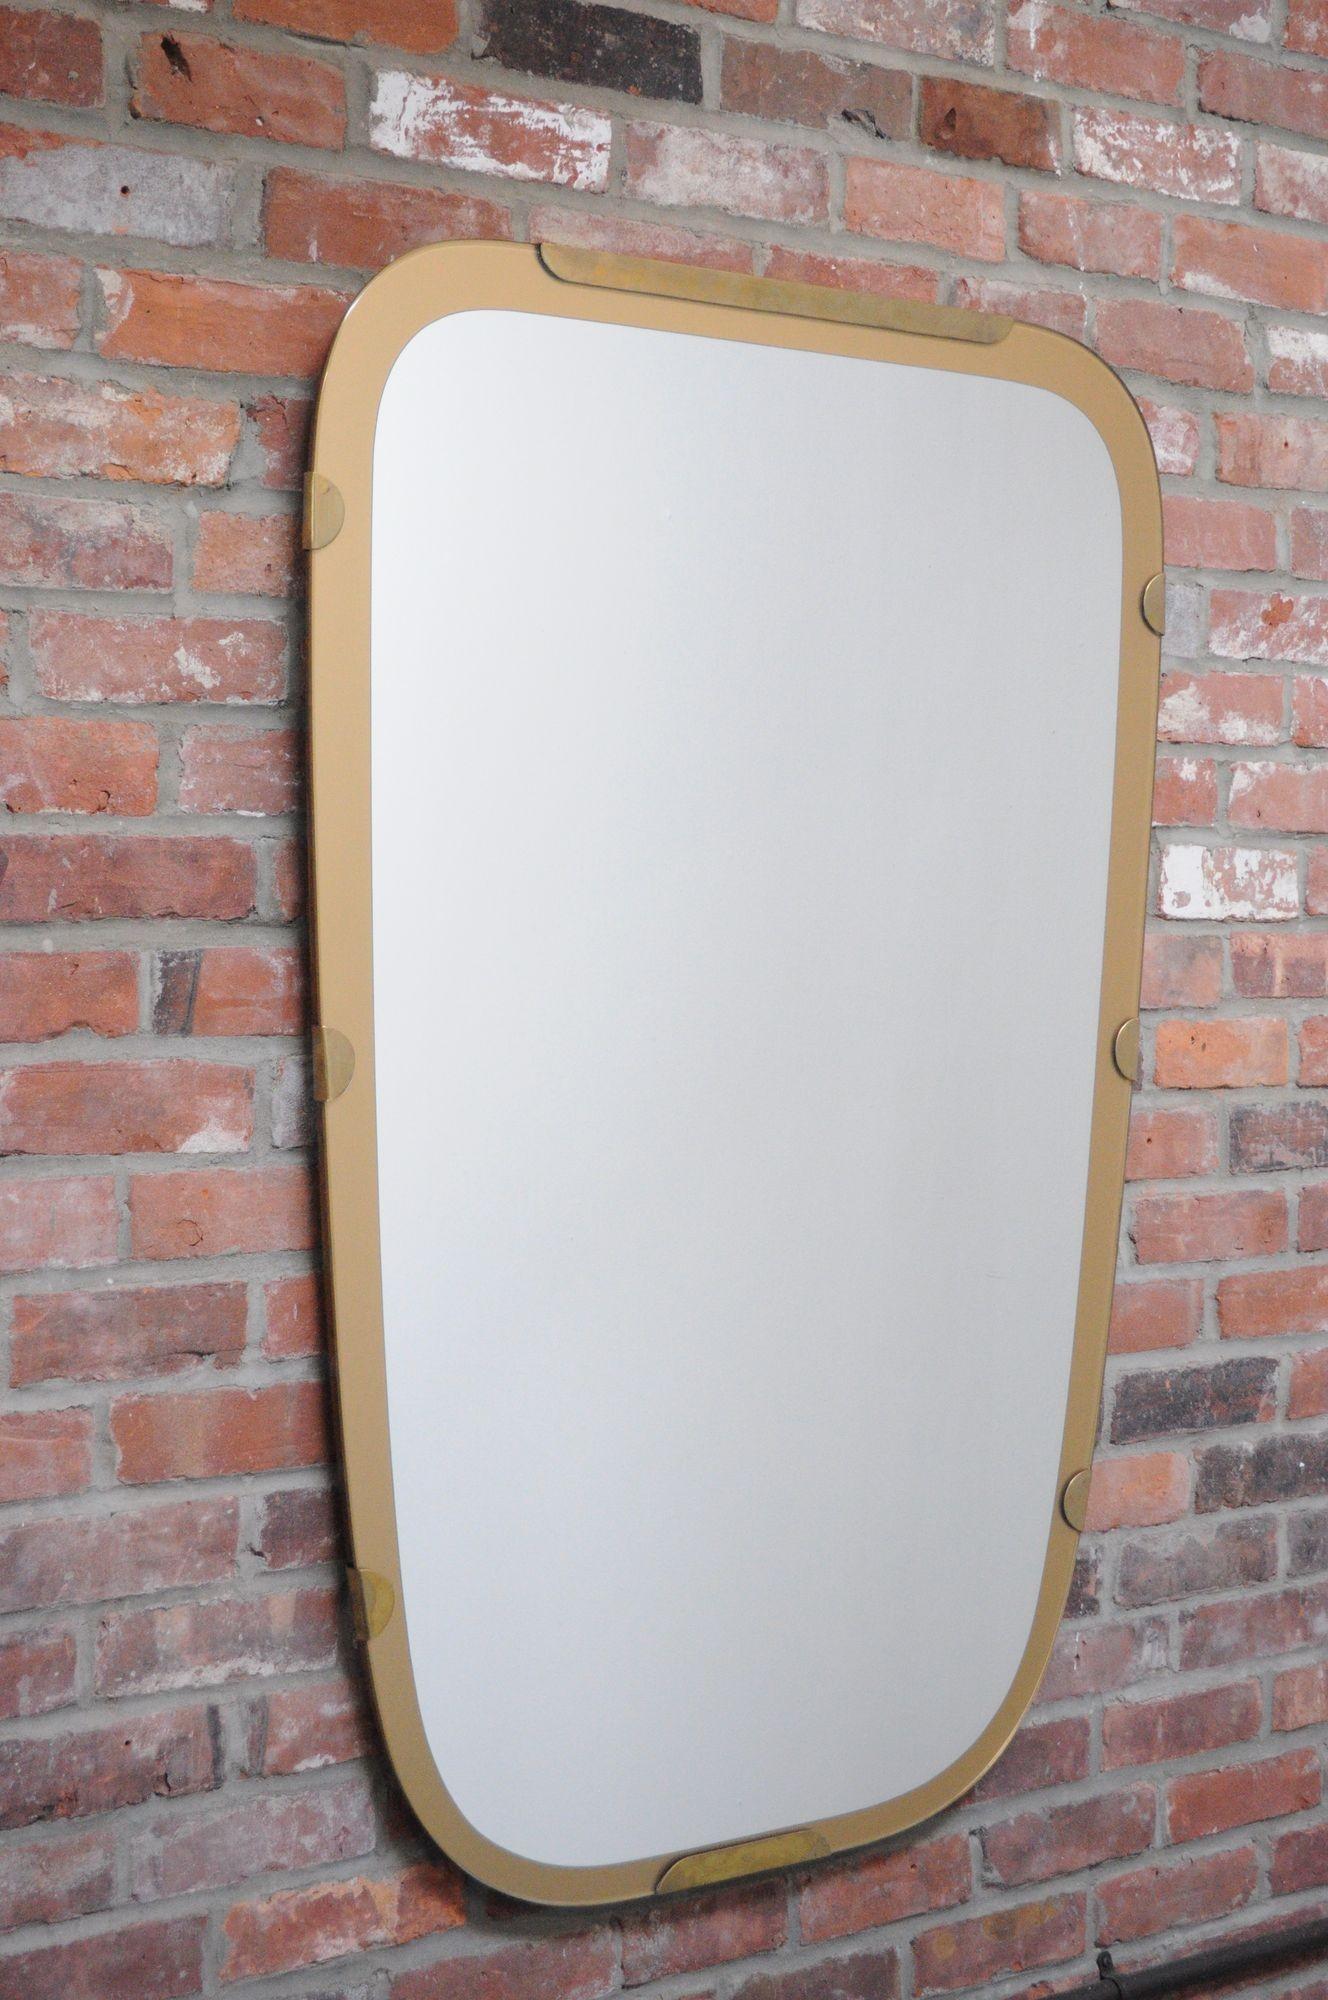 Substantial, sculptural wall mirror composed of a sold Italian walnut backing with gold anodized aluminum trim and brass accents/hardware (ca. 1960, Italy).
Extremely well made with careful attention to quality, durable materials and stylistic